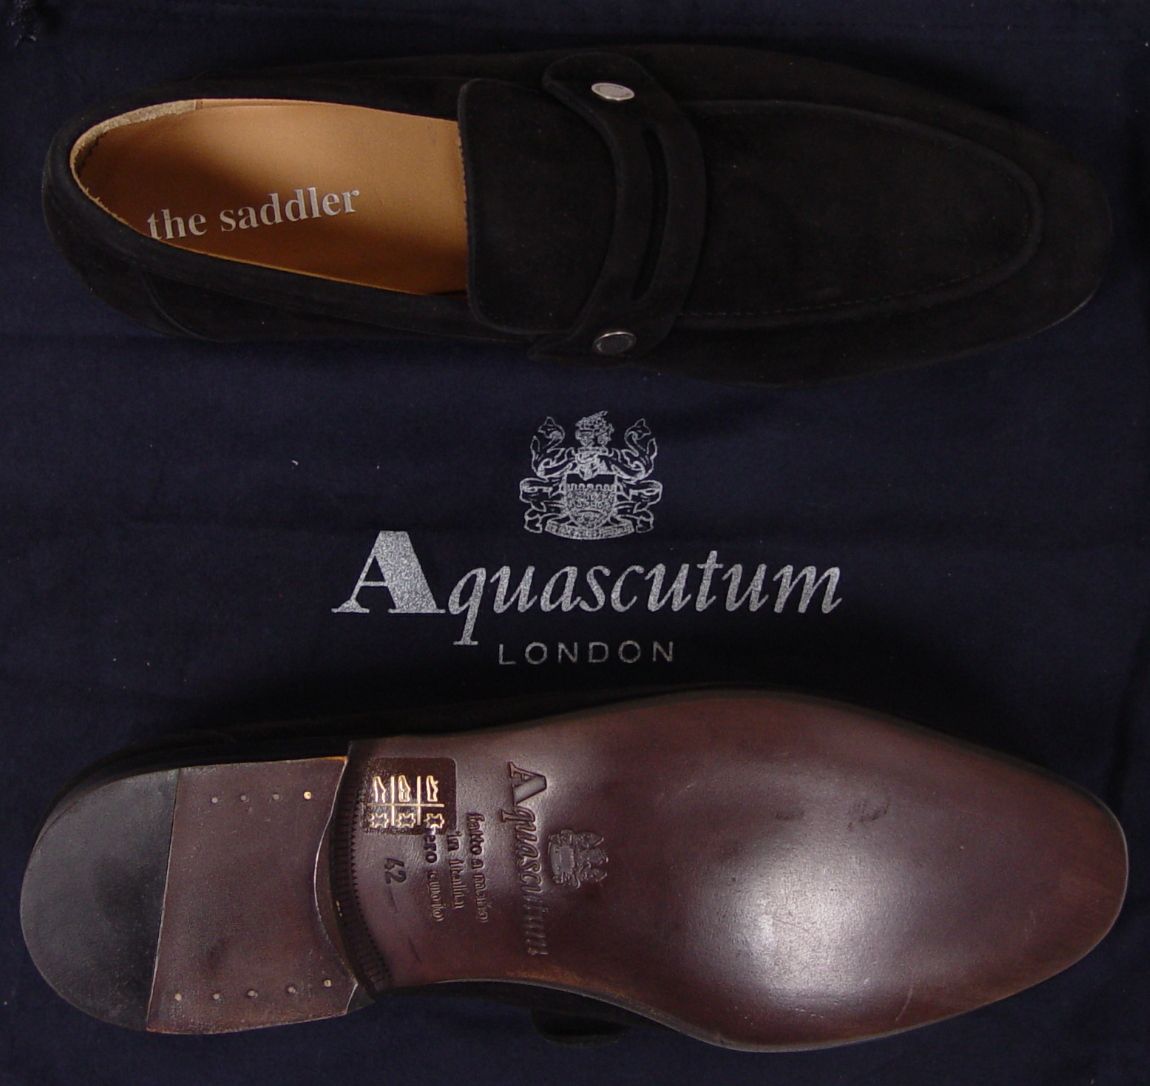 AQUASCUTUM Shoes $565 Black Suede Logo Slotted Vamp Handmade Loafers 9 